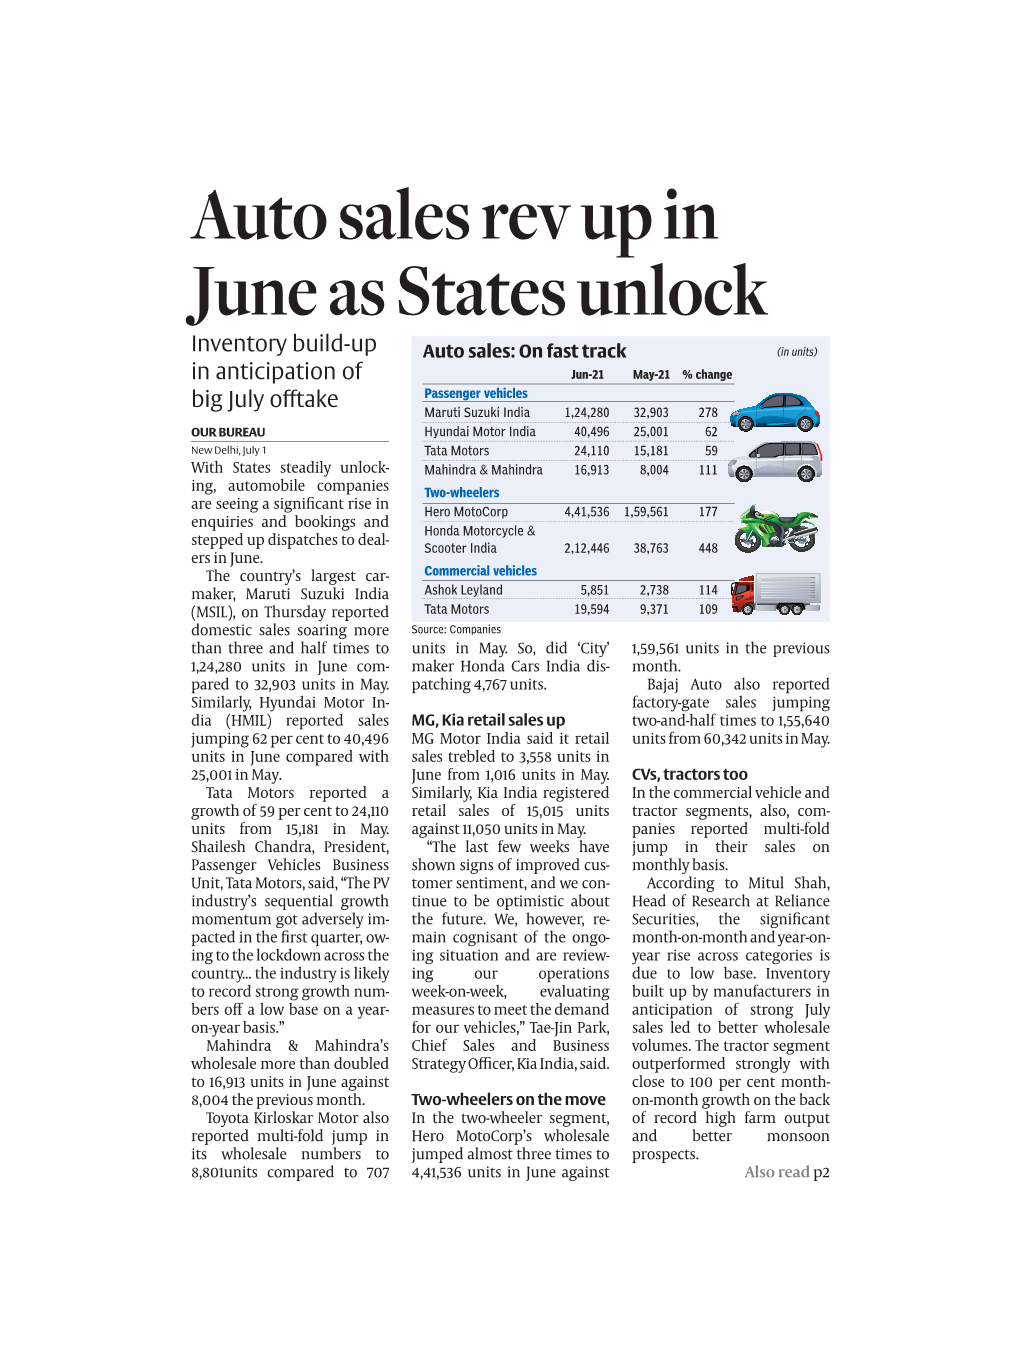 Auto Sales Rev up in June As States Unlock Inventory Build-Up in Anticipation of Big July Offtake